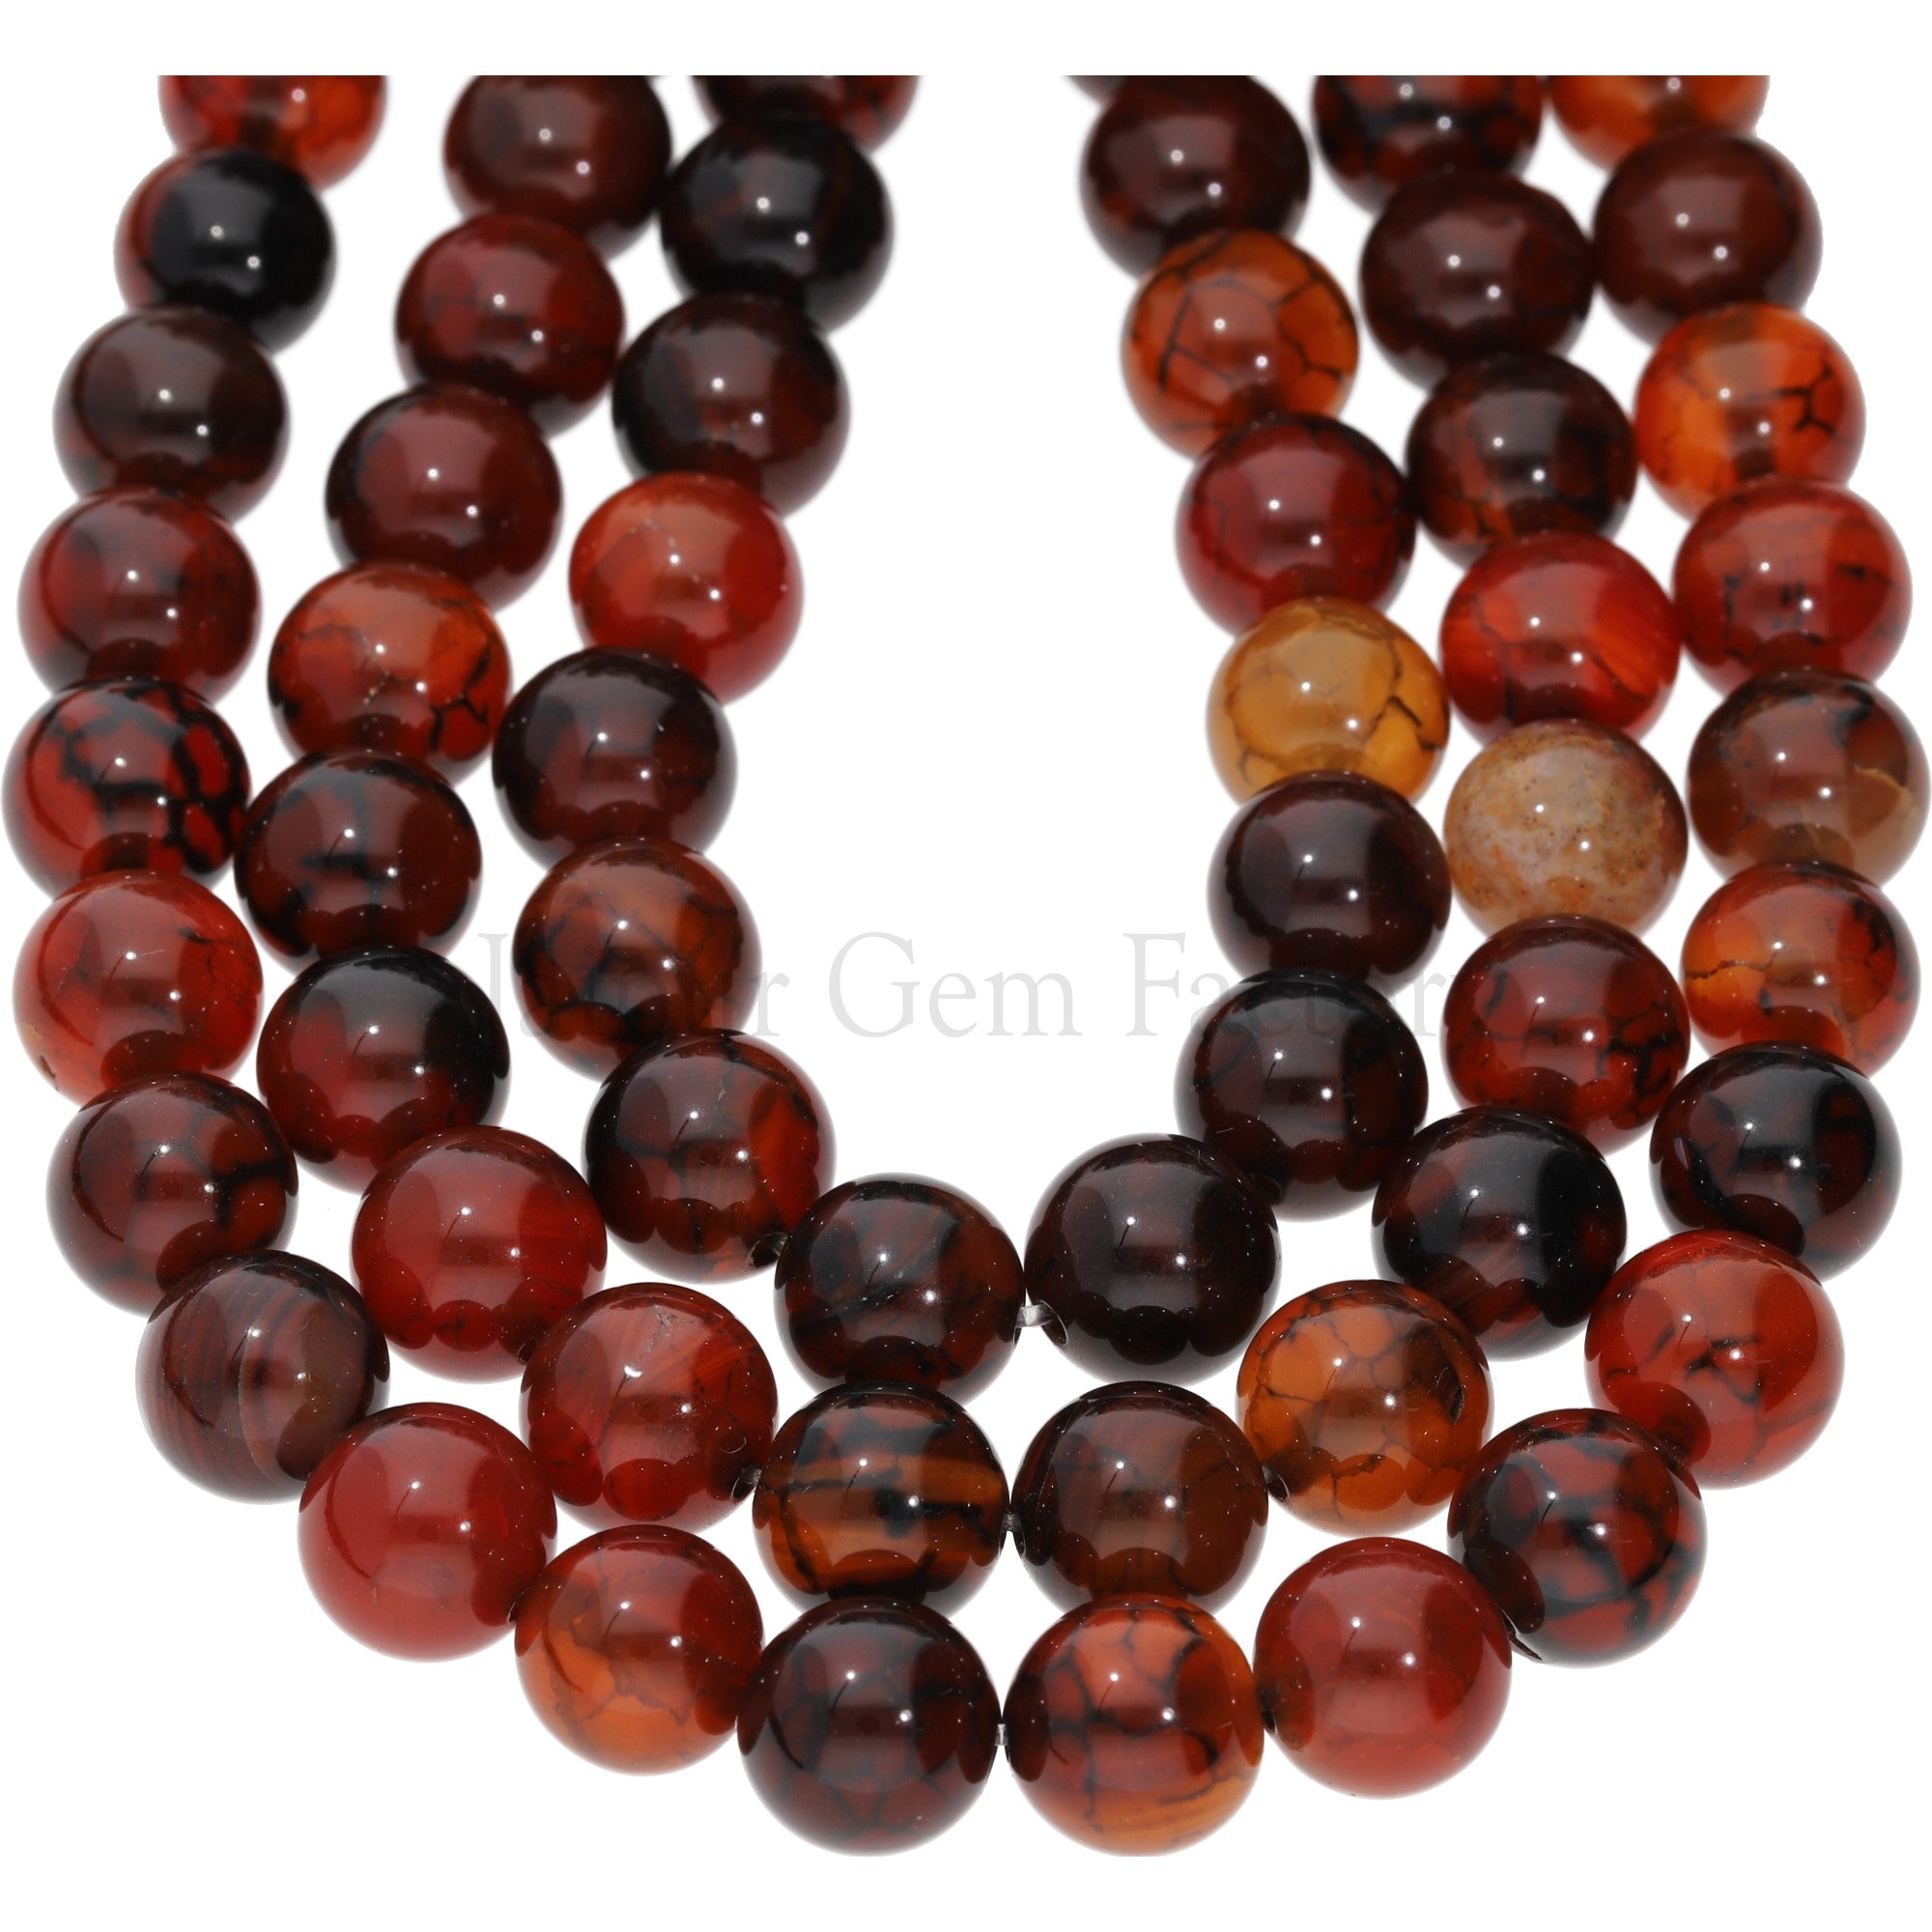 Cracked Agate 10 MM Smooth Round Shape Beads Strand